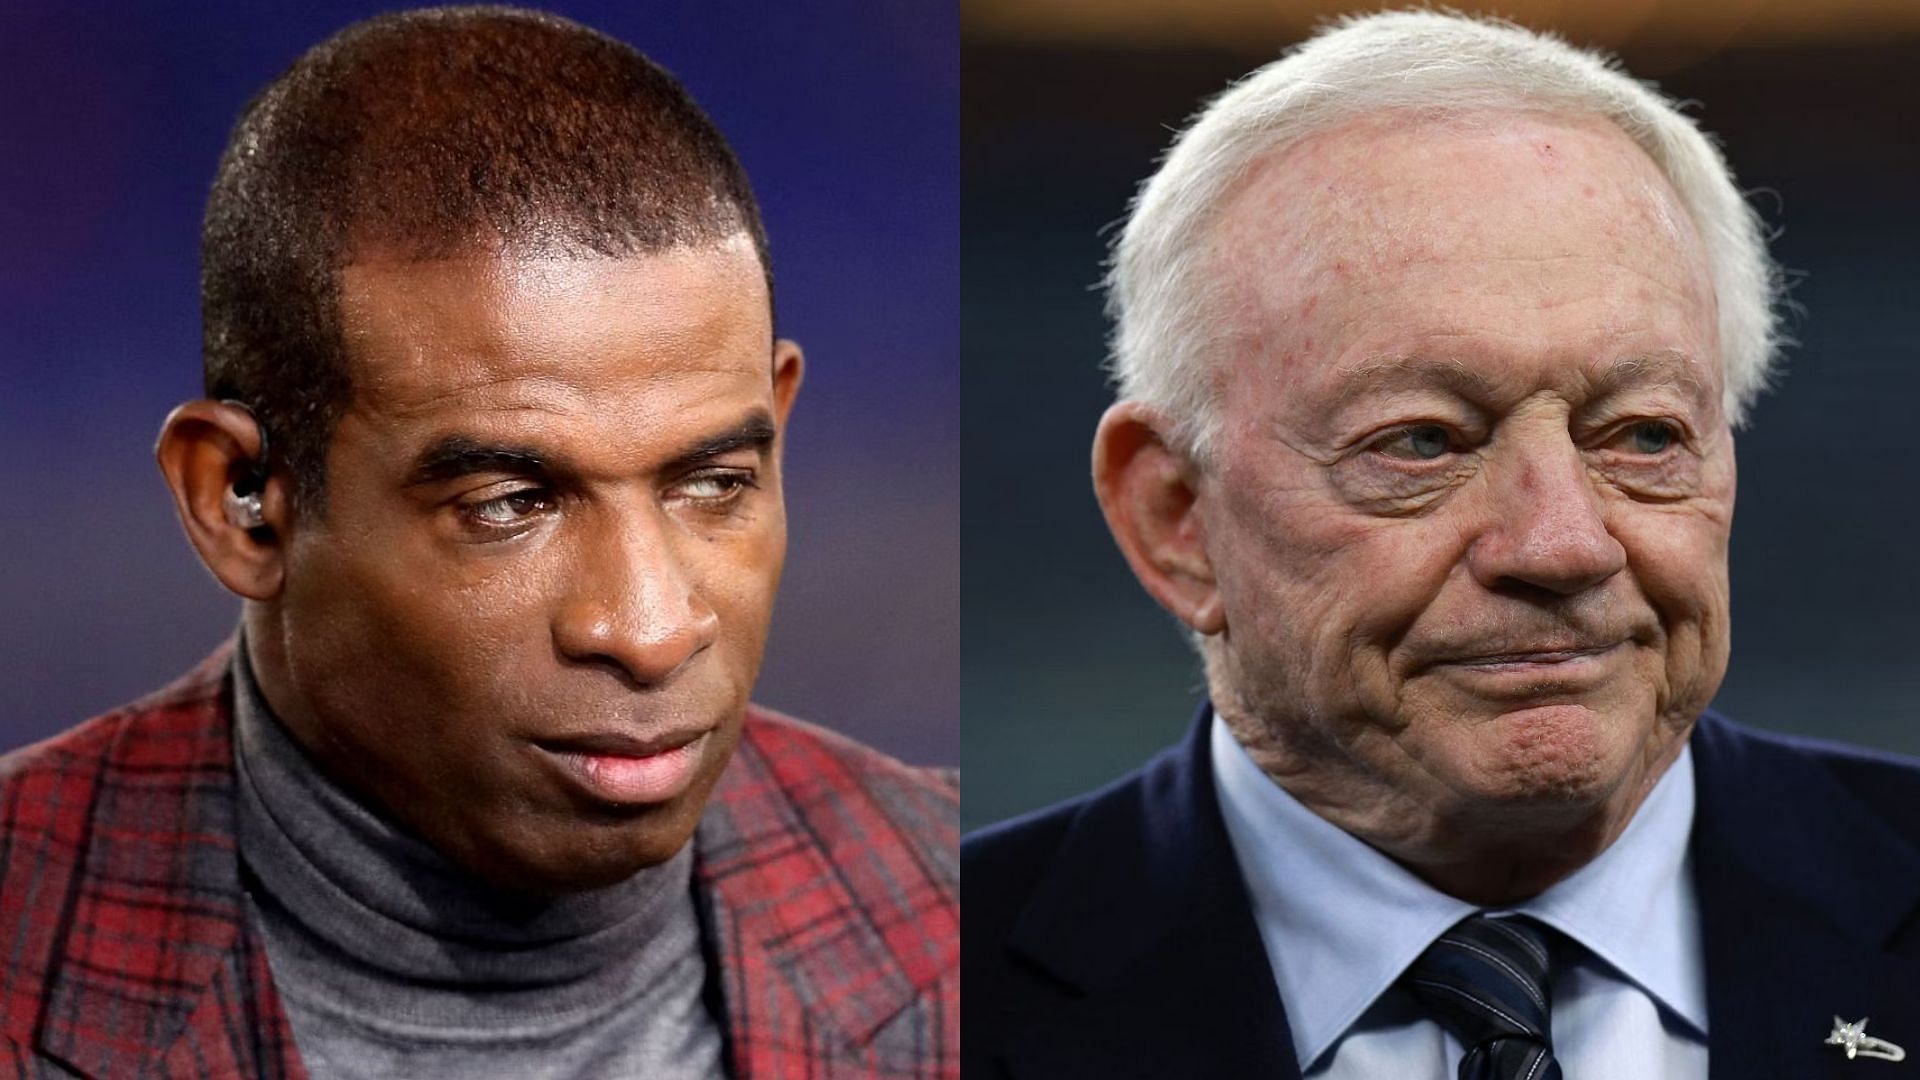 Deion Sanders admitted that he would be too tough of a head coach if given a chance to handle Jerry Jones